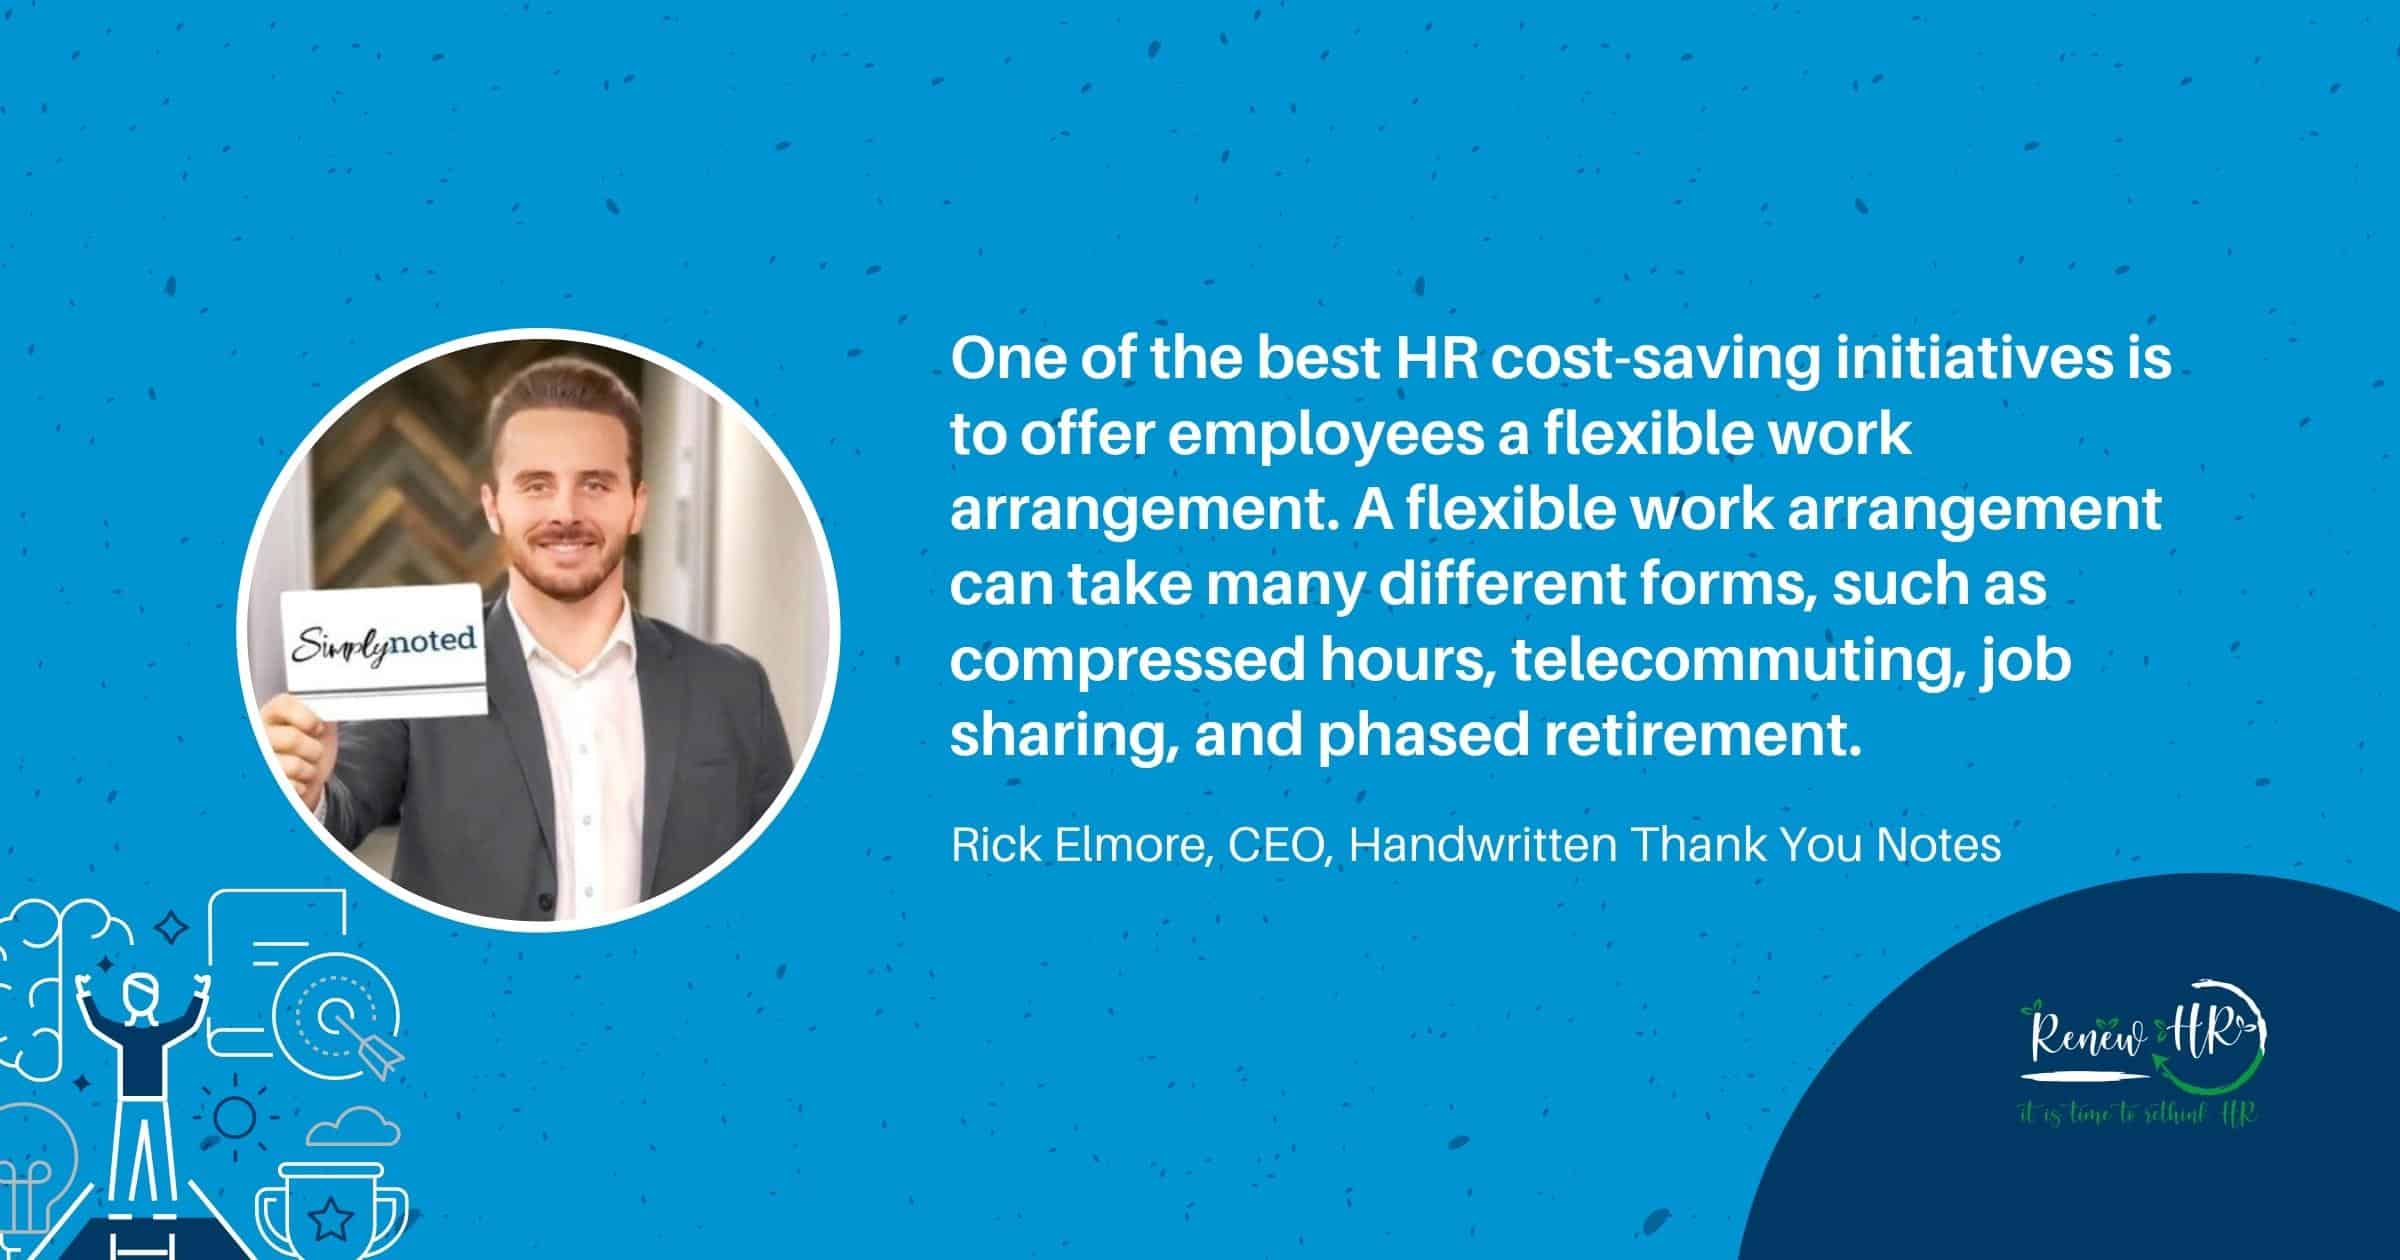 Rick Elmore Pullquote RenewHR 7 of The Best HR Cost-Saving Initiatives